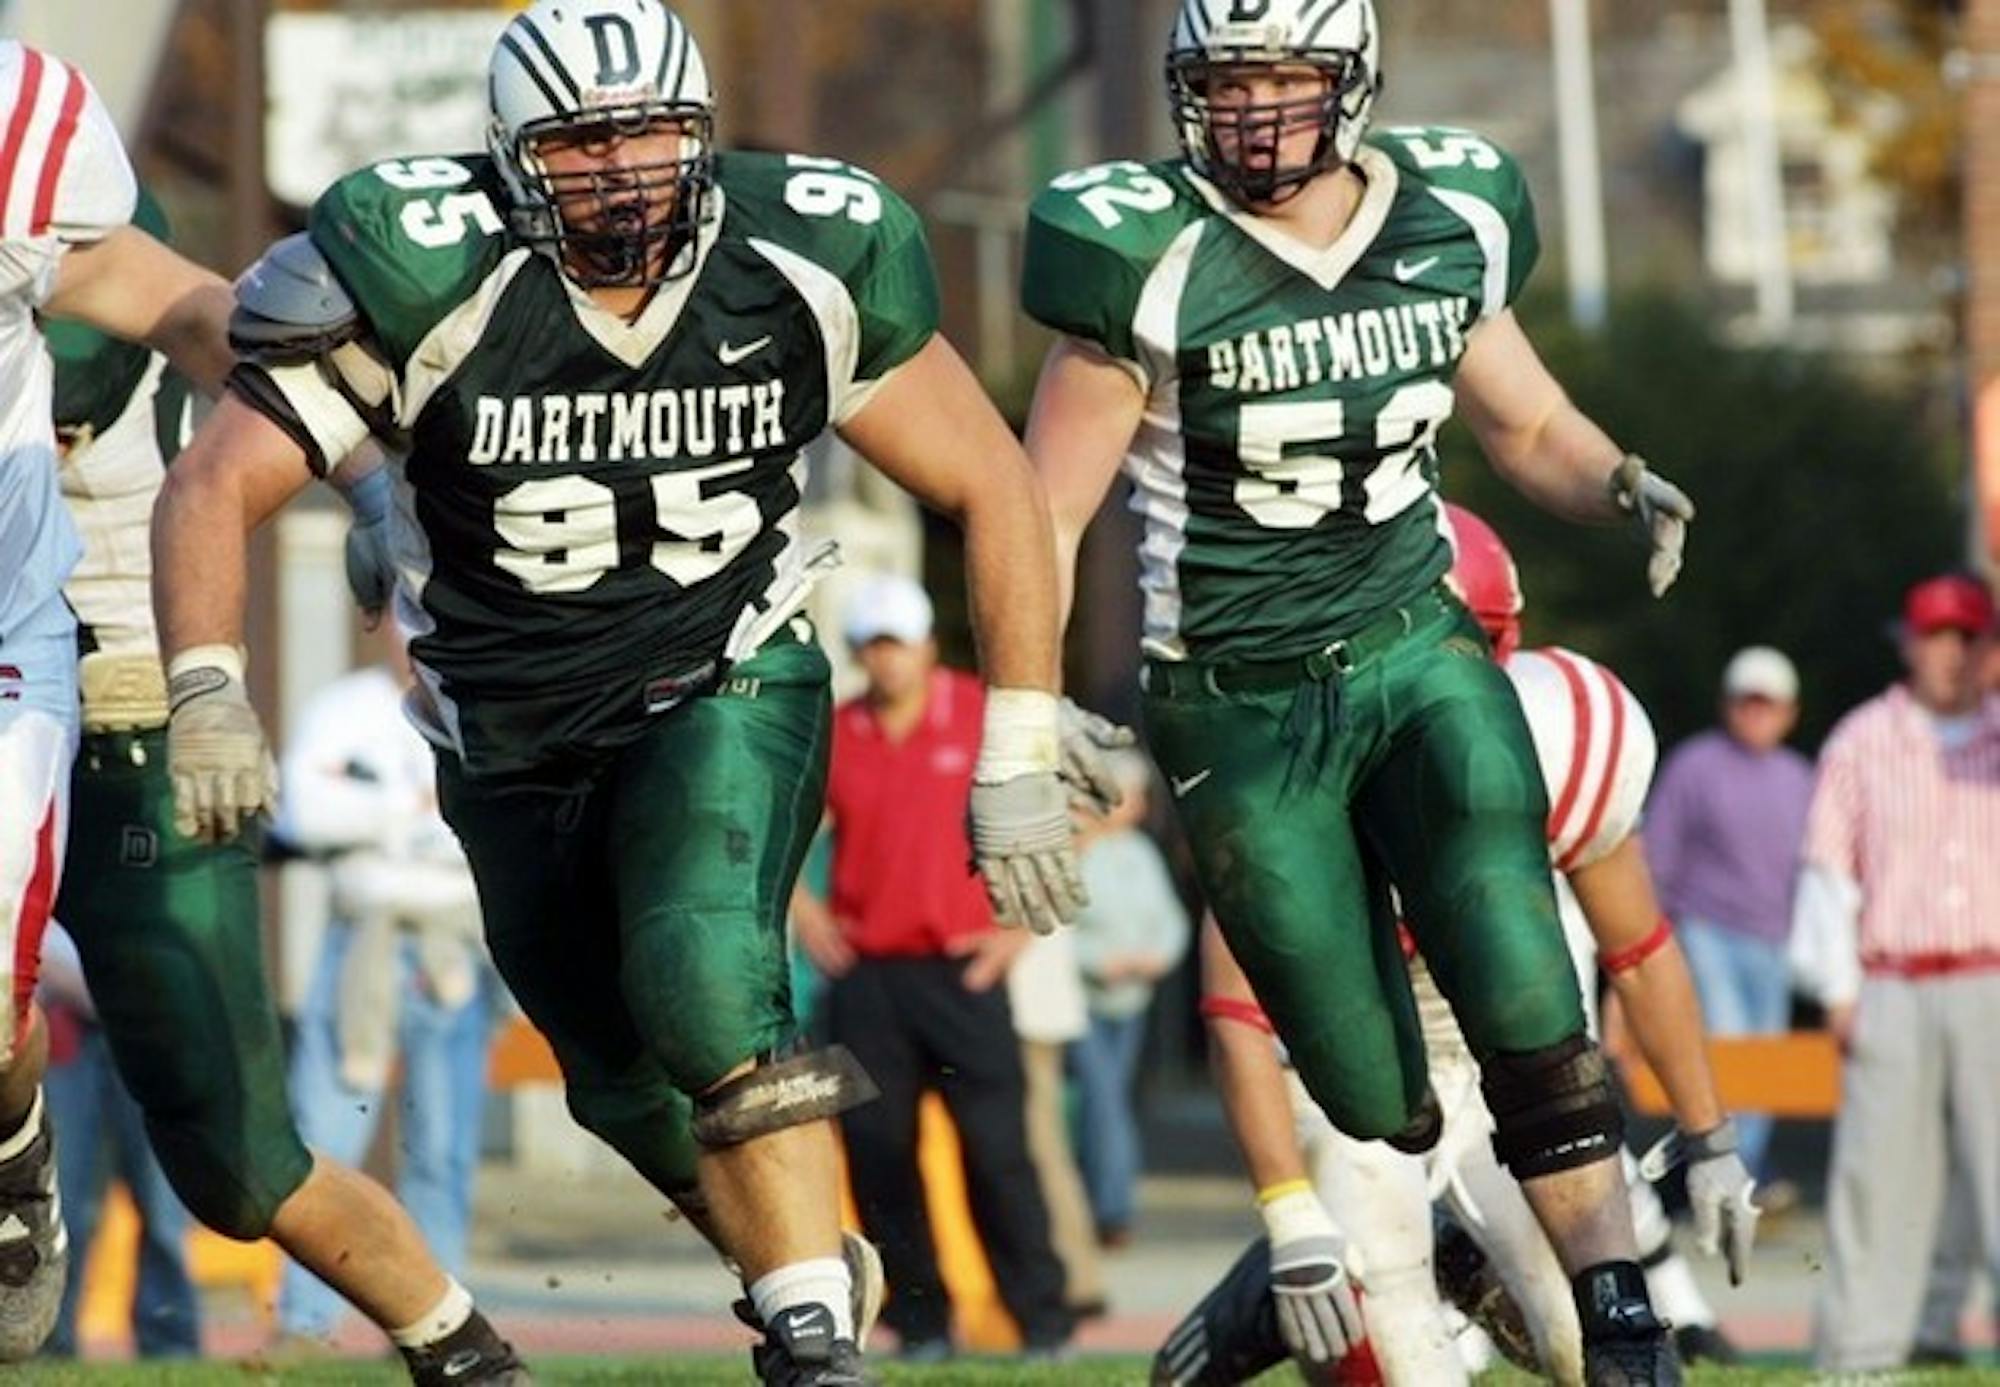 The Big Green will look to hand in-state rival UNH a defeat for the first time in 30 years when the teams square off at Memorial Field Saturday.